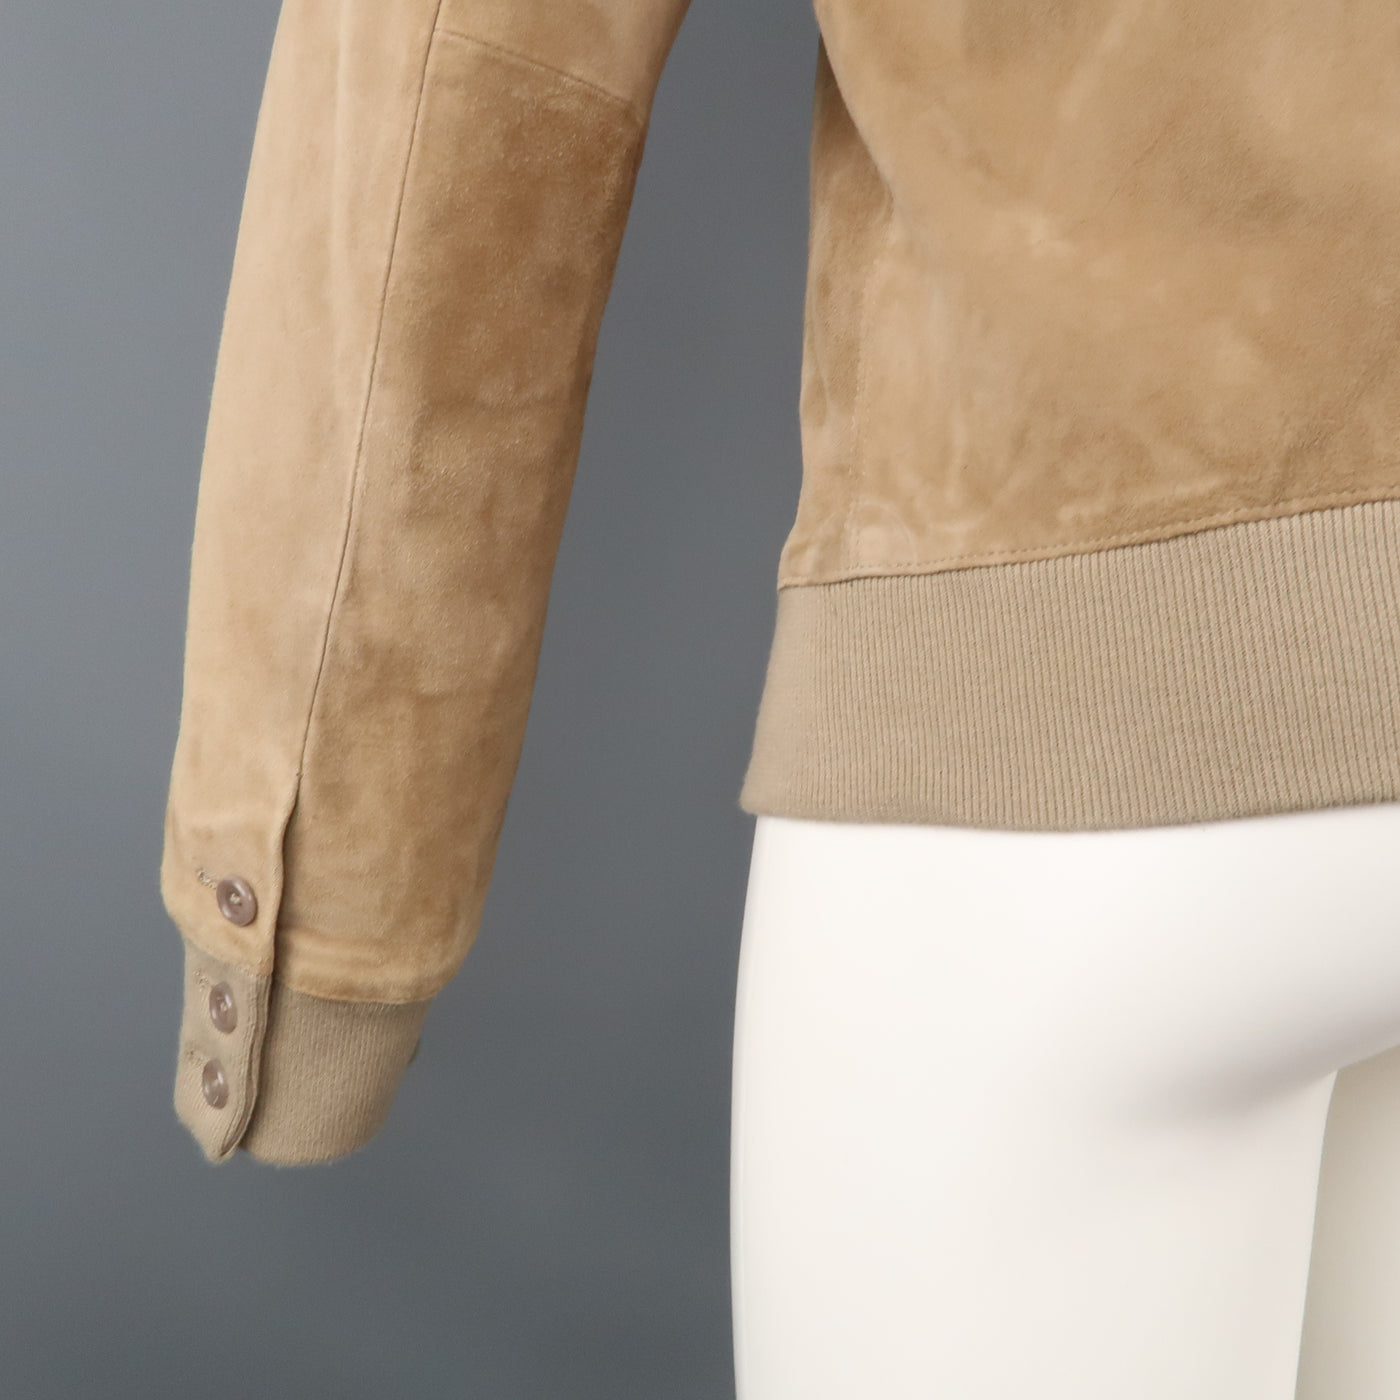 S.W.O.R.D 40 Tan Suede Buttoned Bomber Style  Jacket